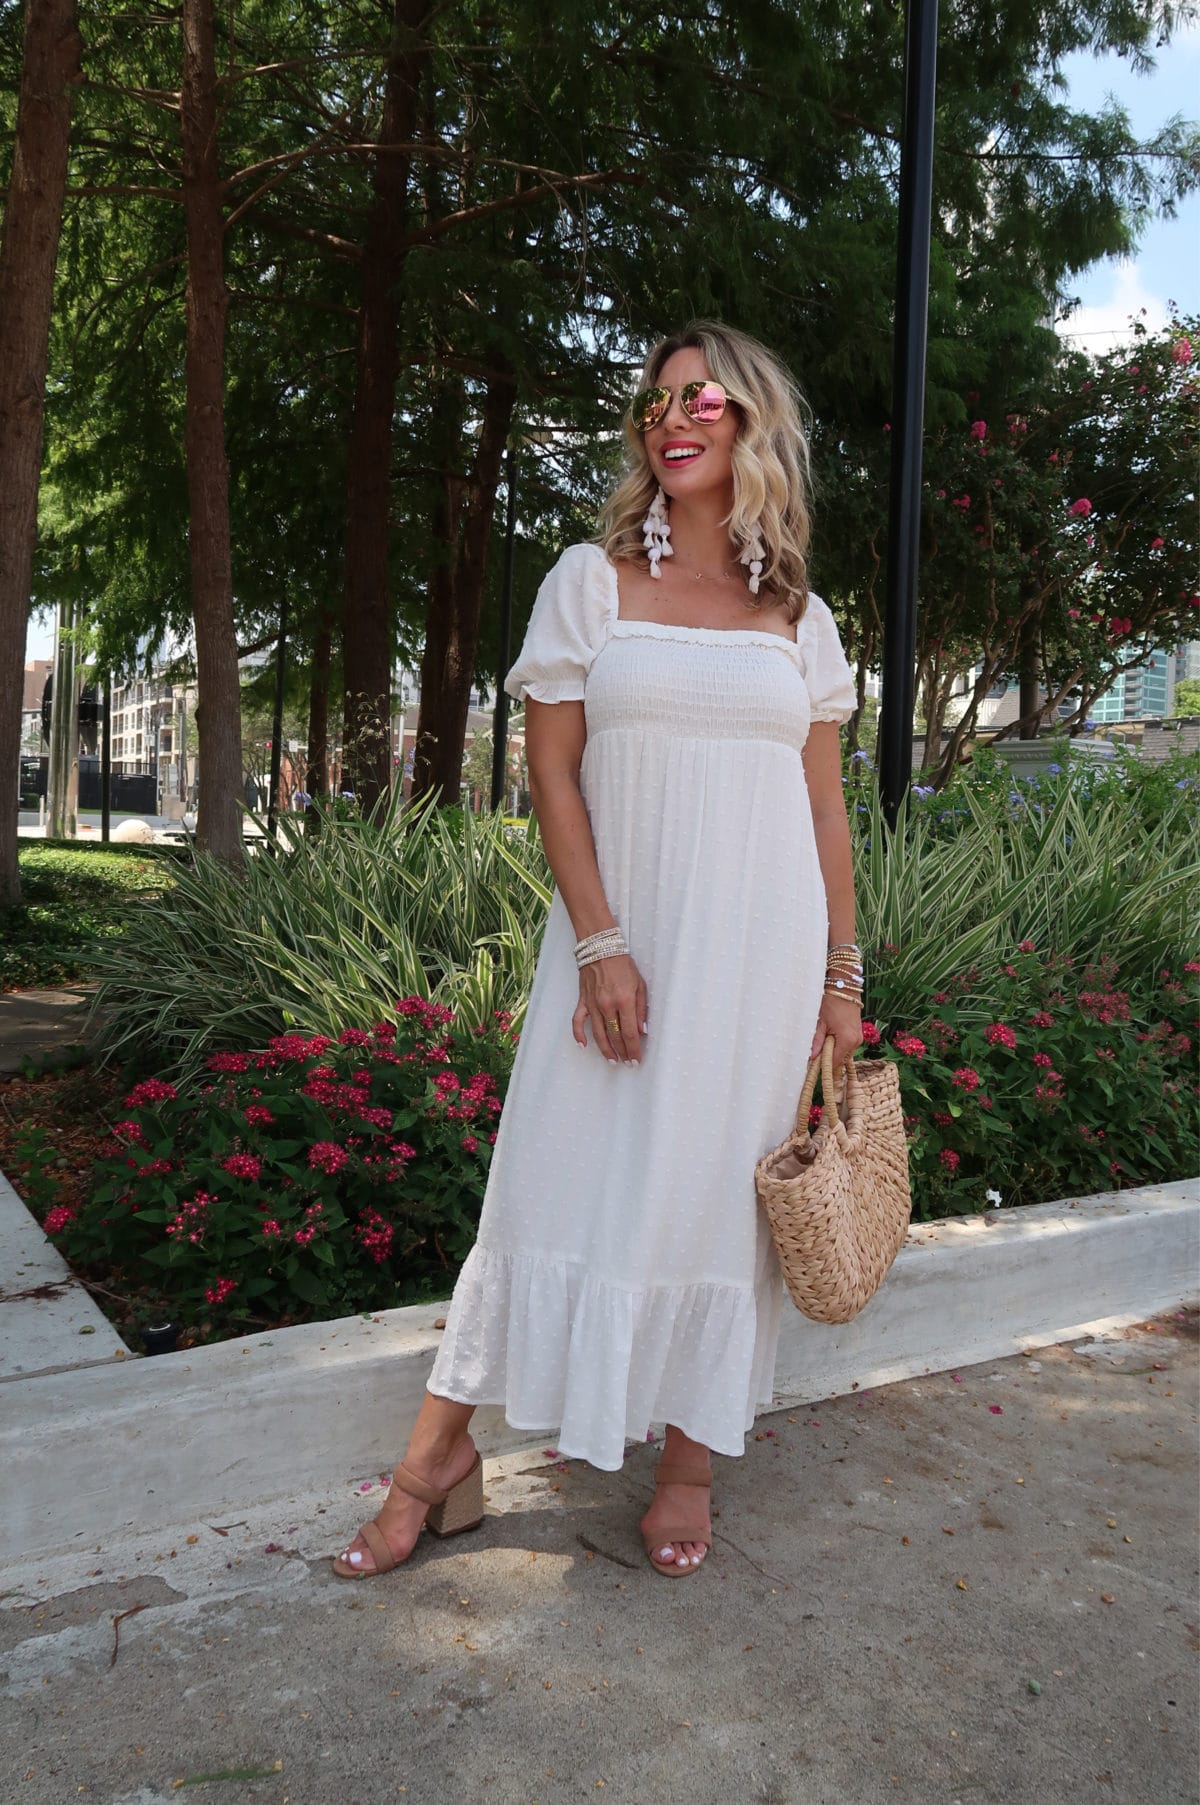 New Summer Styles, Gibson and Nordstrom, White Clip Dot Dress, Sandals, Woven Bag 